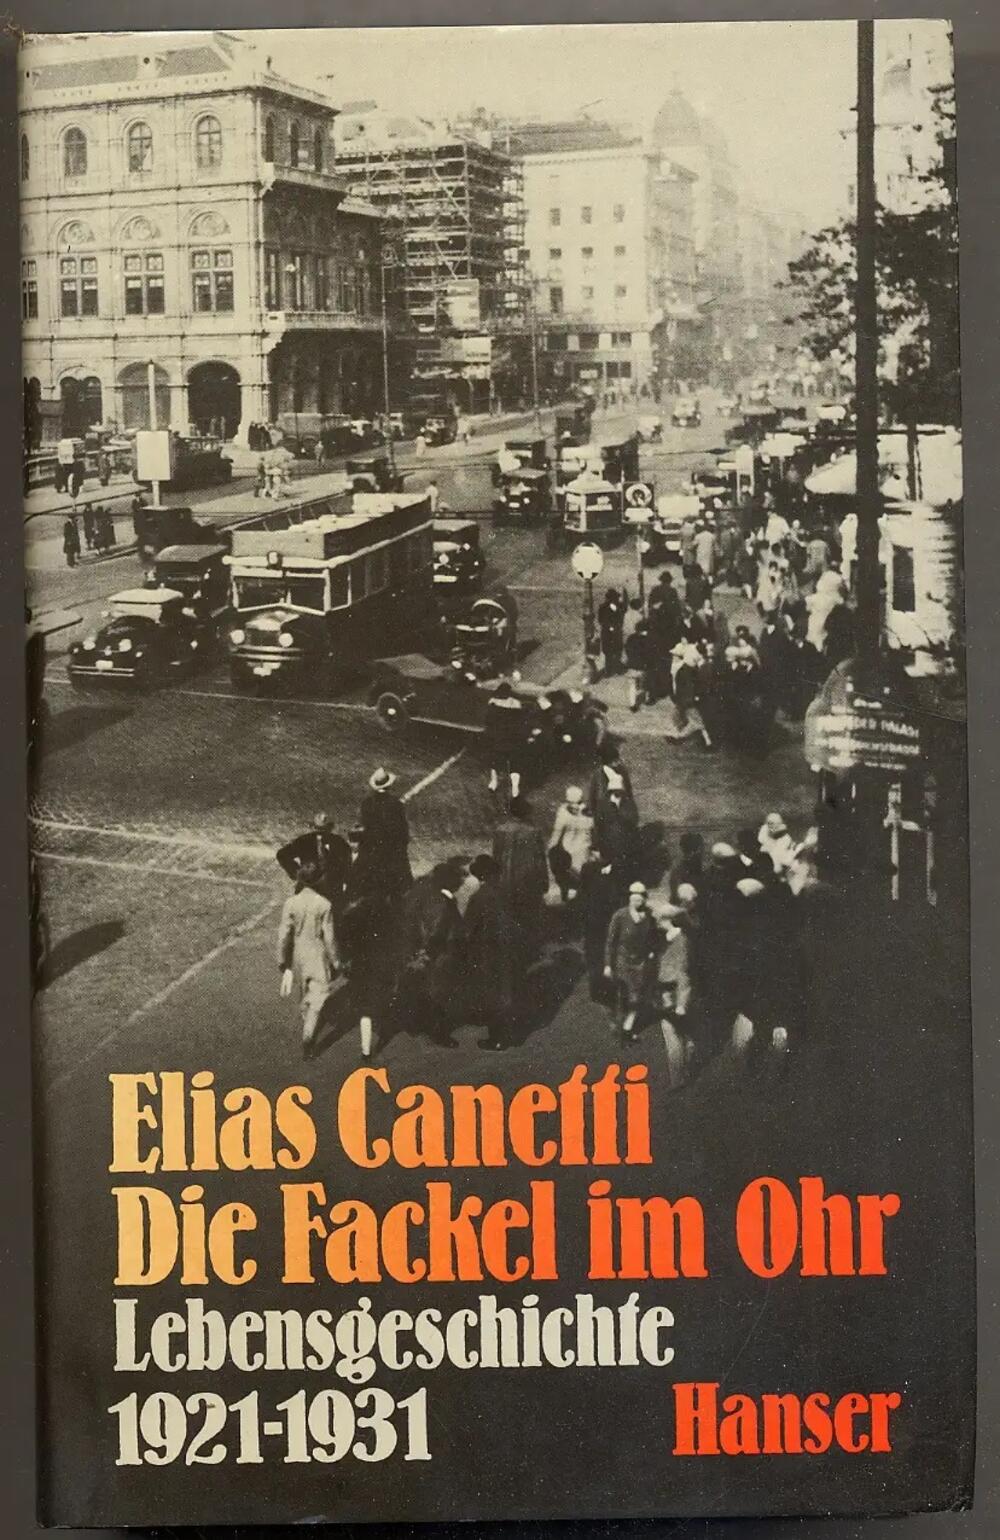 The book "Torch in the ear" by Elias Canetti